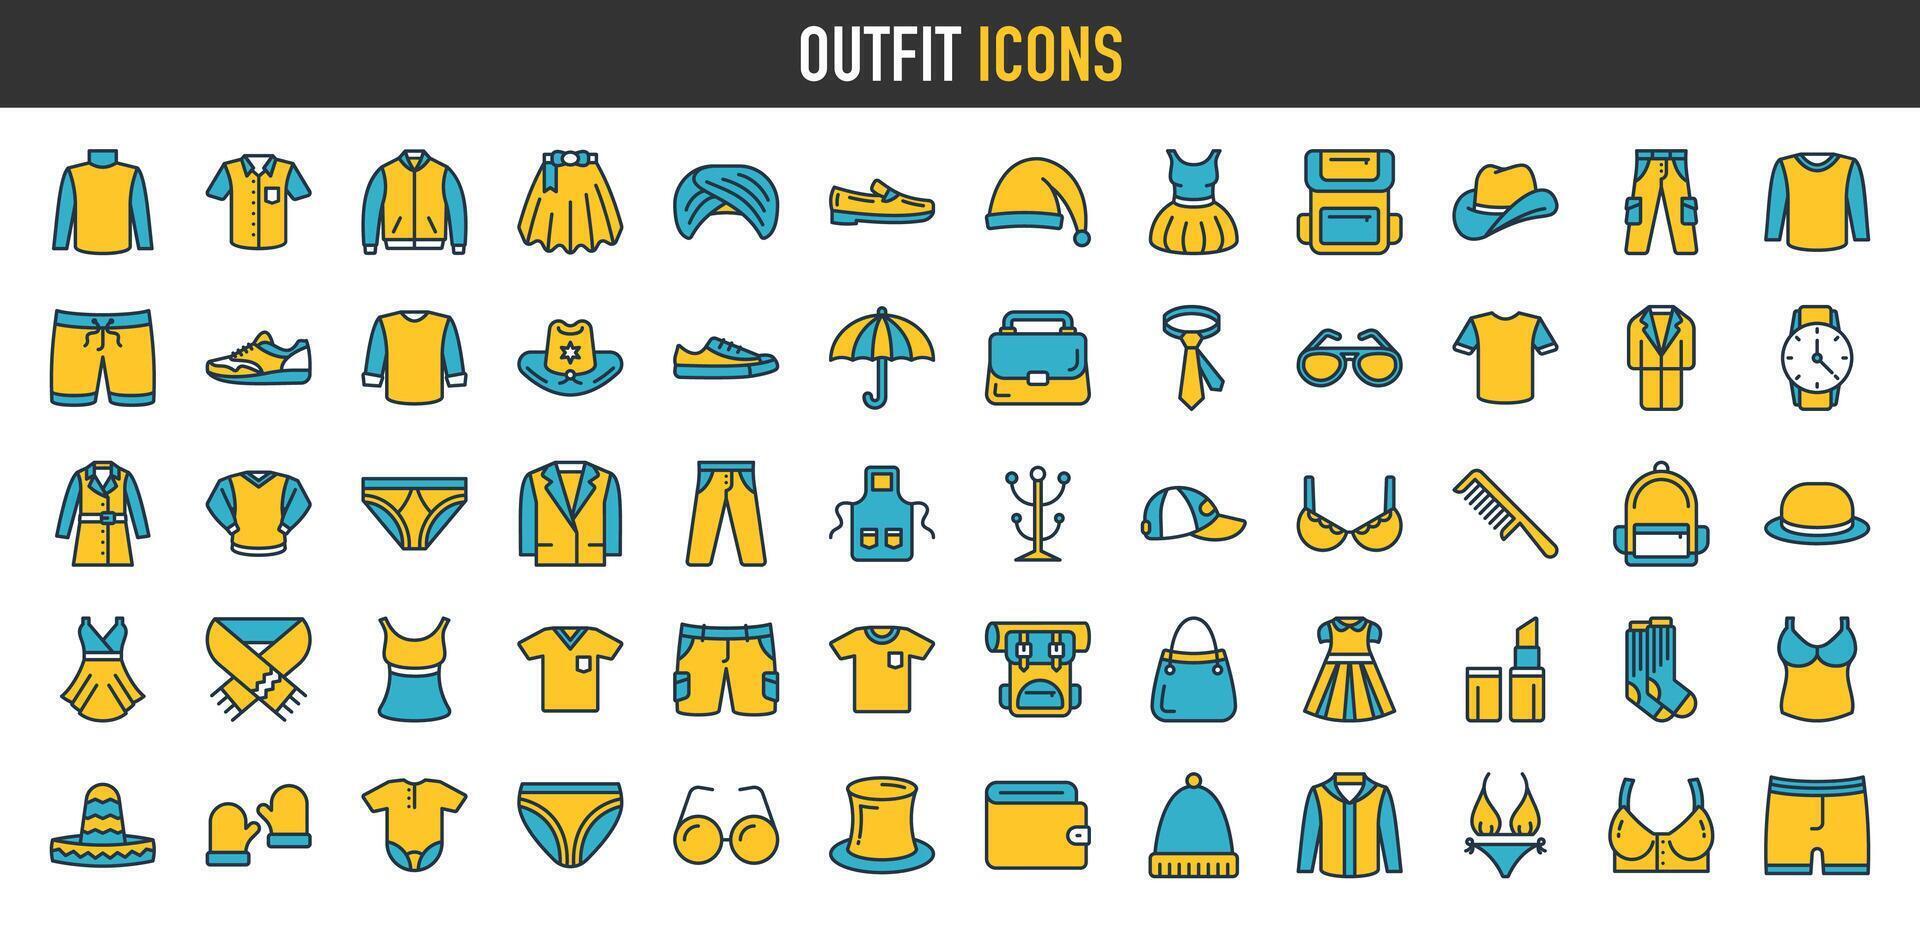 Outfit icon set. Socks, bra, tie, shirt, watch, hat, shorts minimal vector illustrations. Solid signs for fashion application.